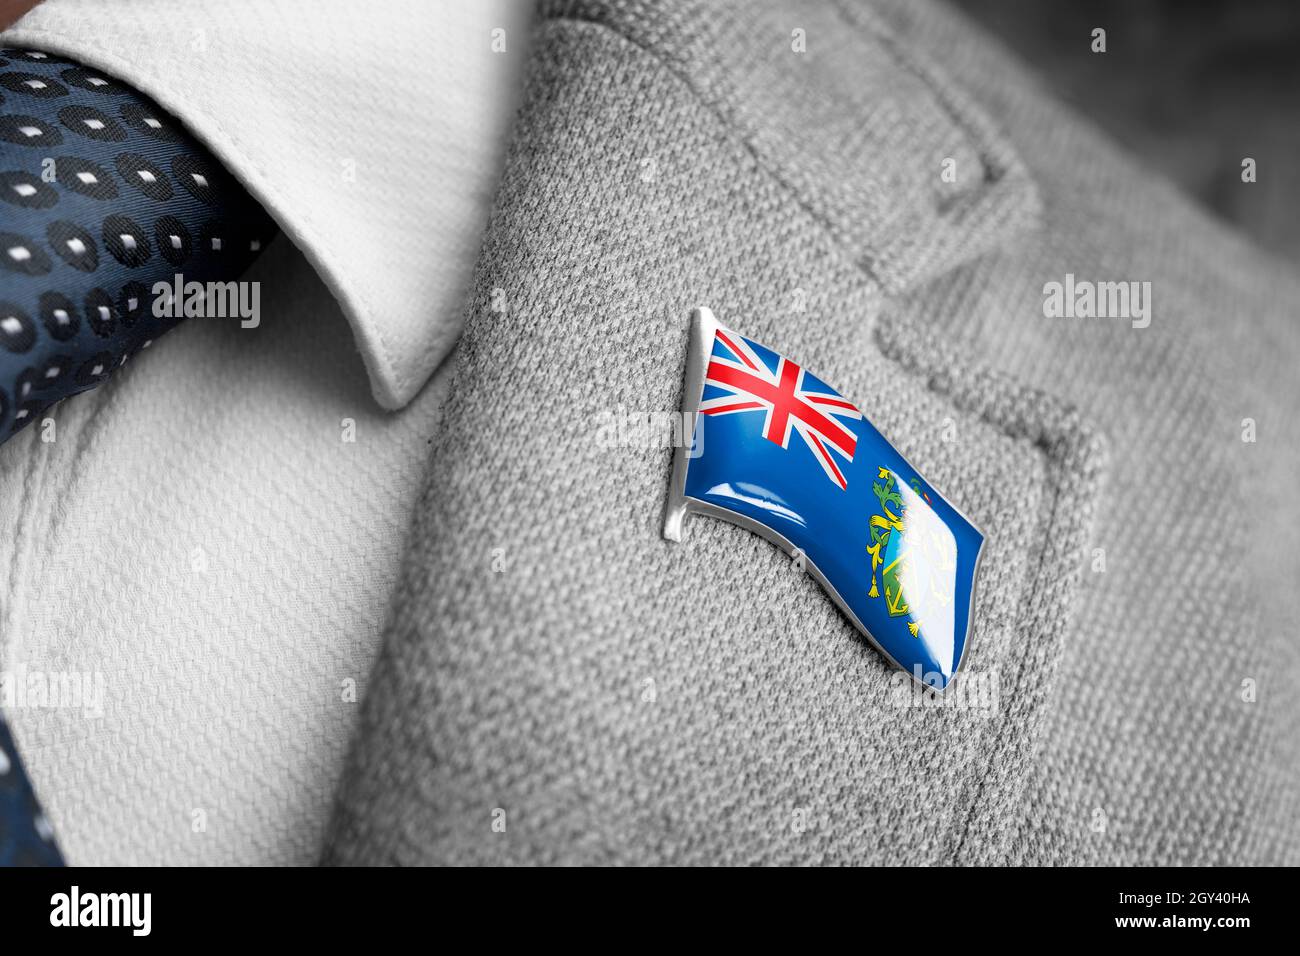 Metal badge with the flag of Pitcairn Islands on a suit lapel Stock Photo